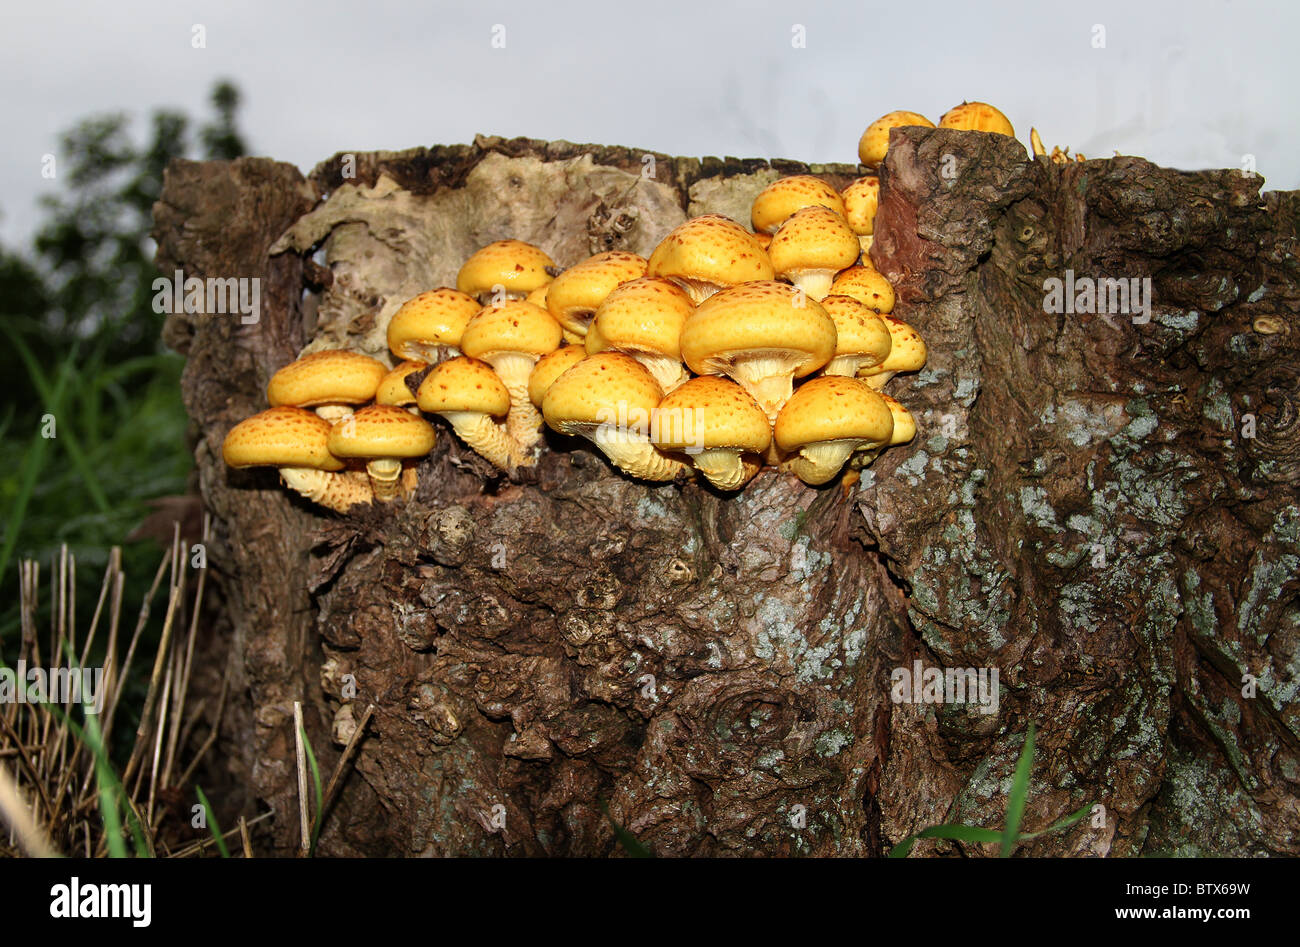 Toadstools growing in large numbers on rotting tree stump in public park. Stock Photo